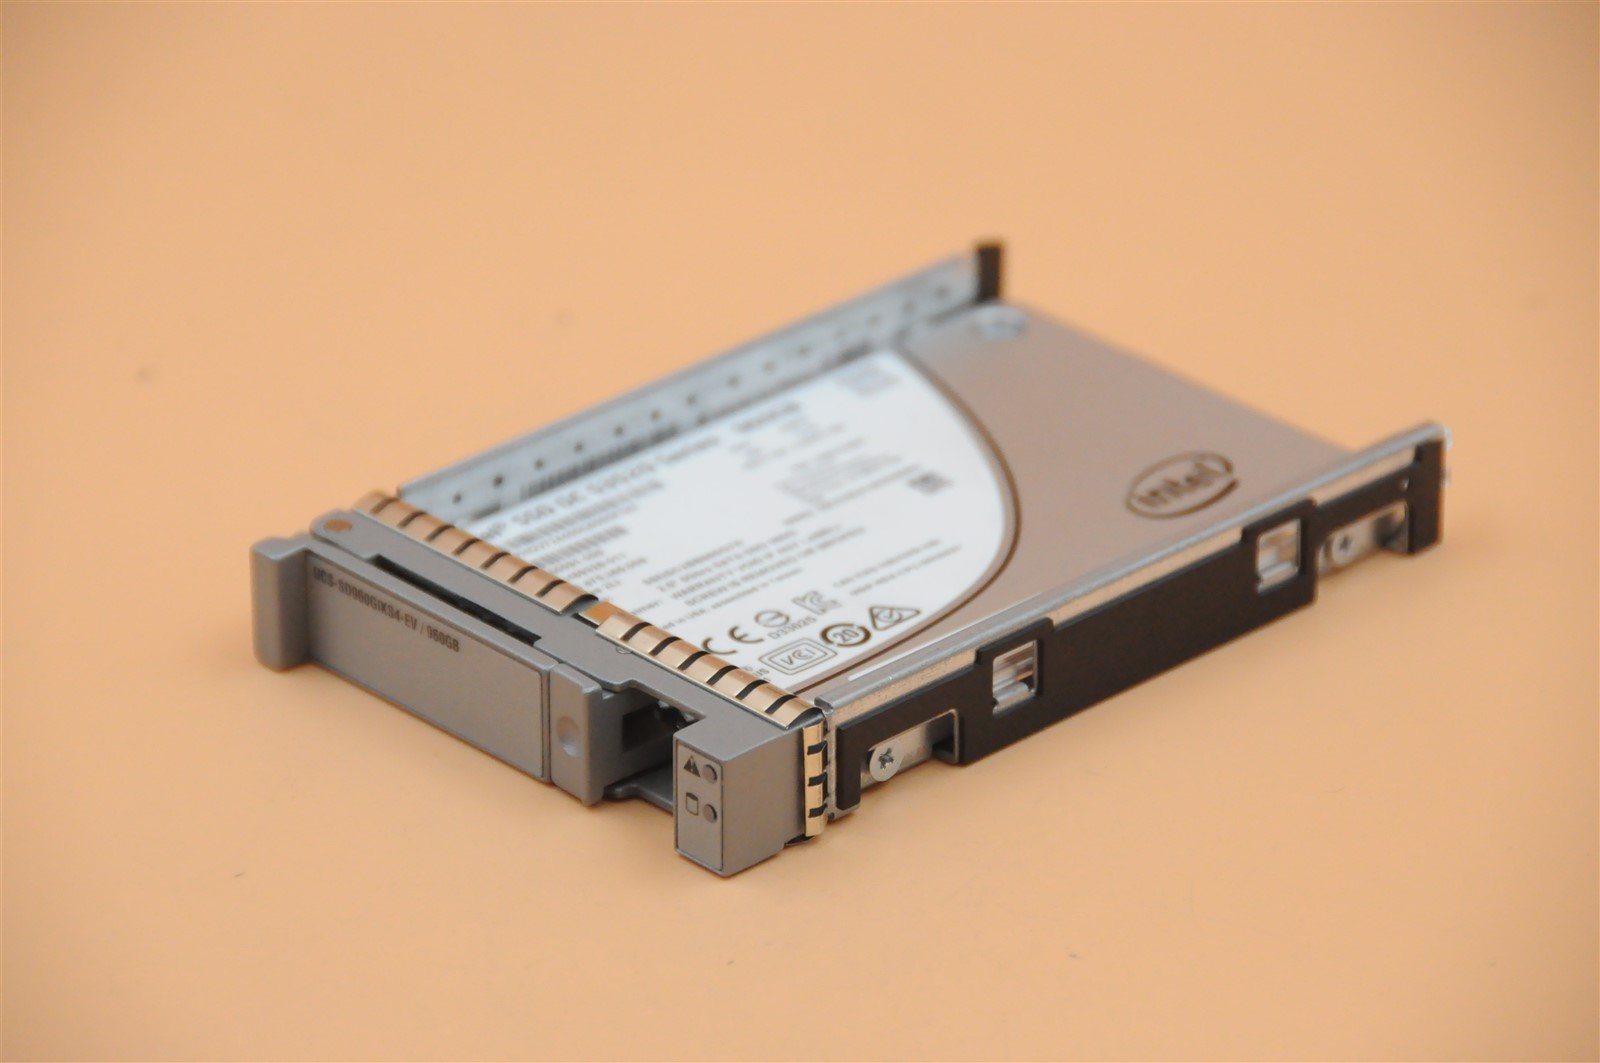 UCS-SD960GIKS4-EV SSDSC2BB960G7K S3520 CISCO 960GB 6G 2.5" SATA MLC SOLID STATE DRIVE